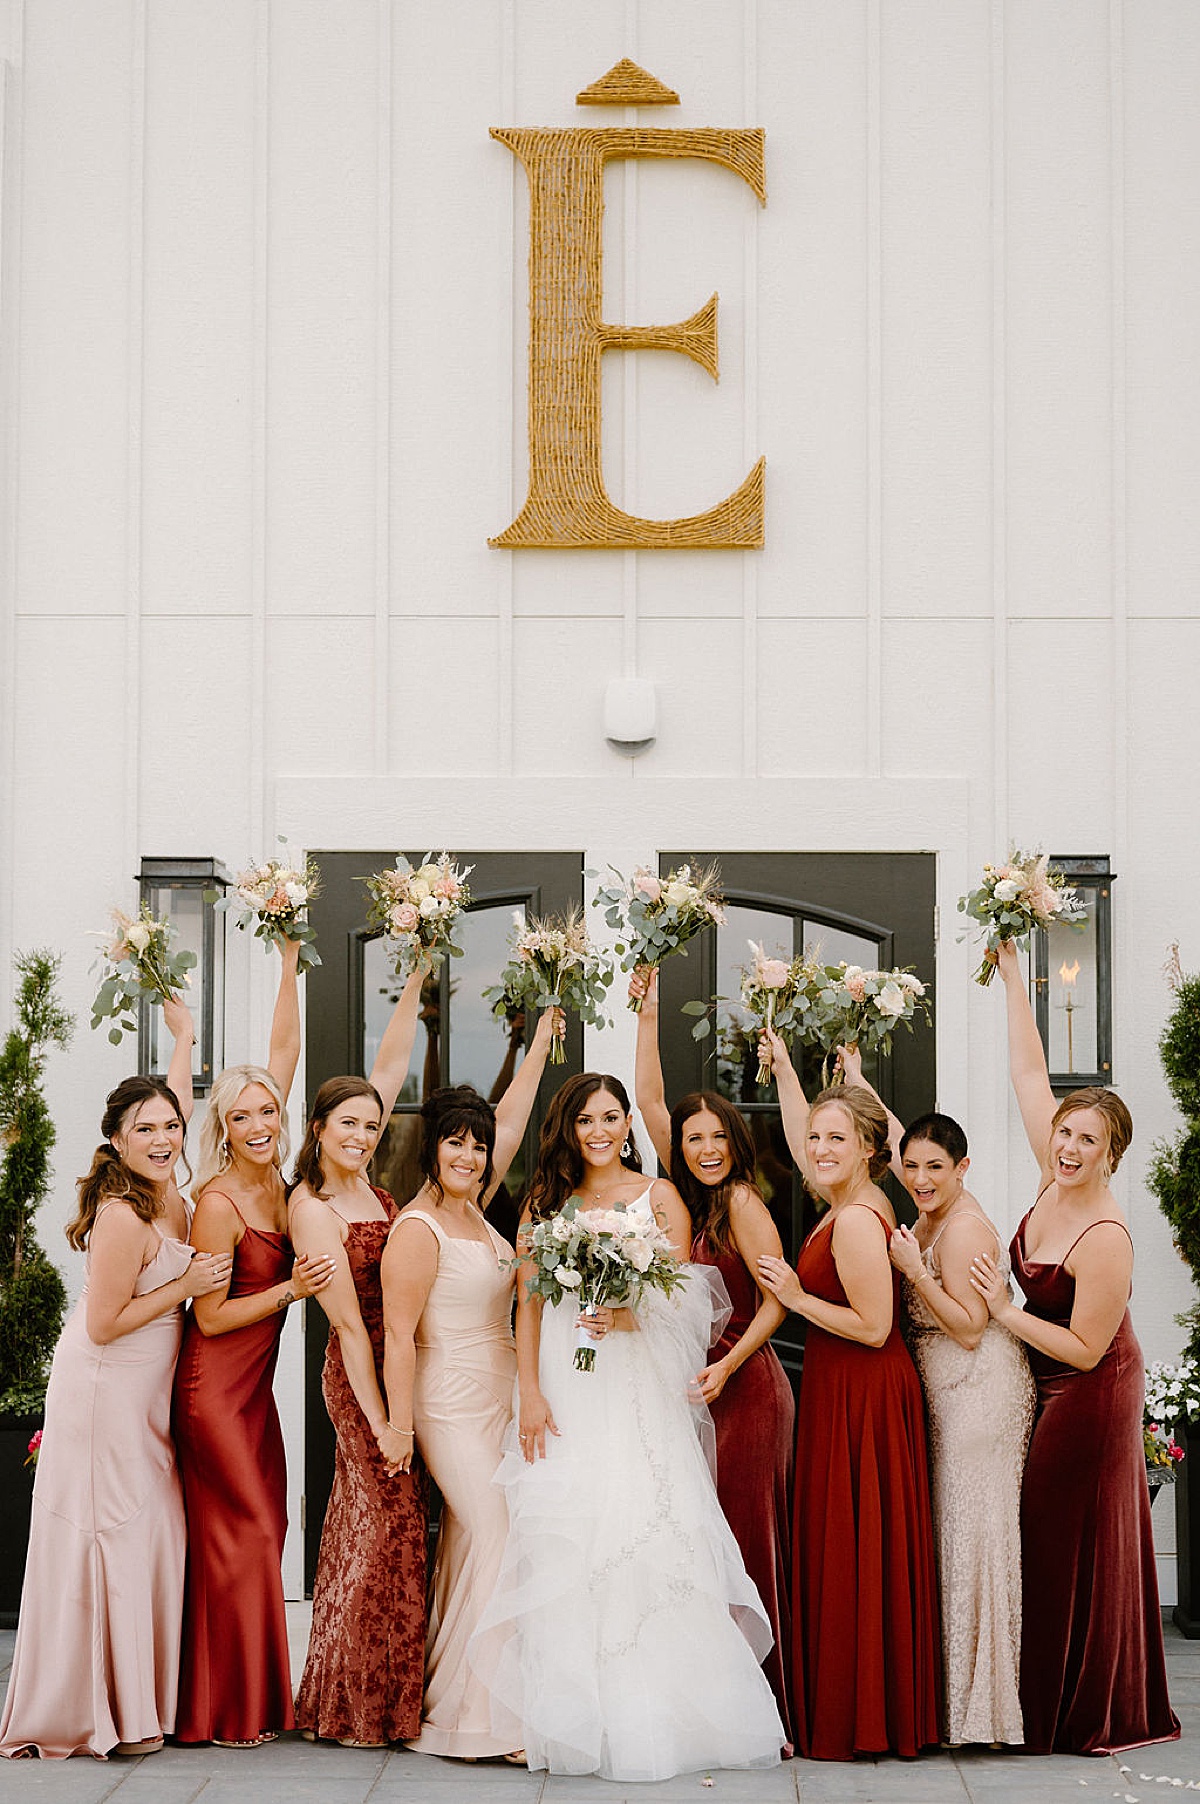 bride in romantic gown poses with bridesmaids in burgundy and champagne pink dresses before wedding shot by Indigo Lace Collective